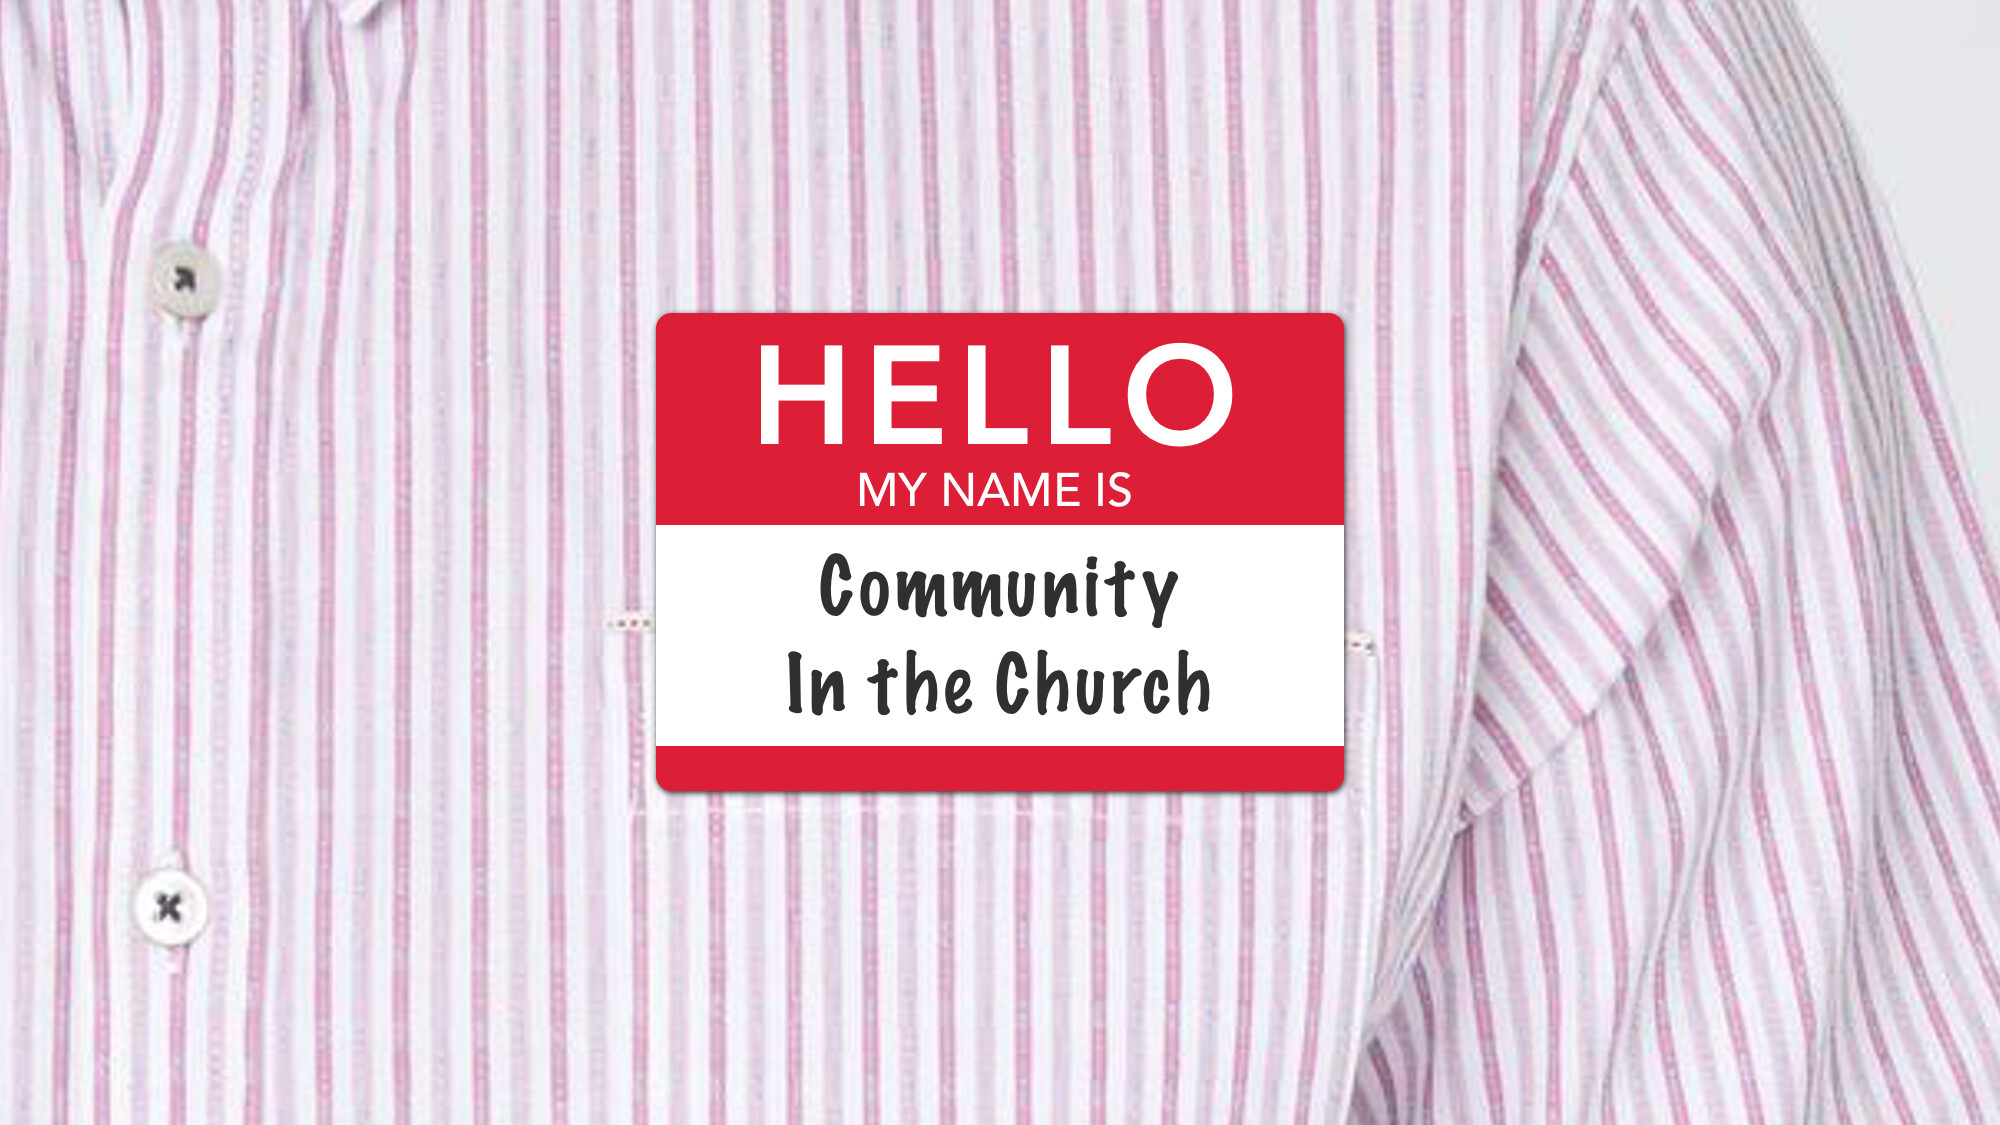 Introductions: Community In the Church